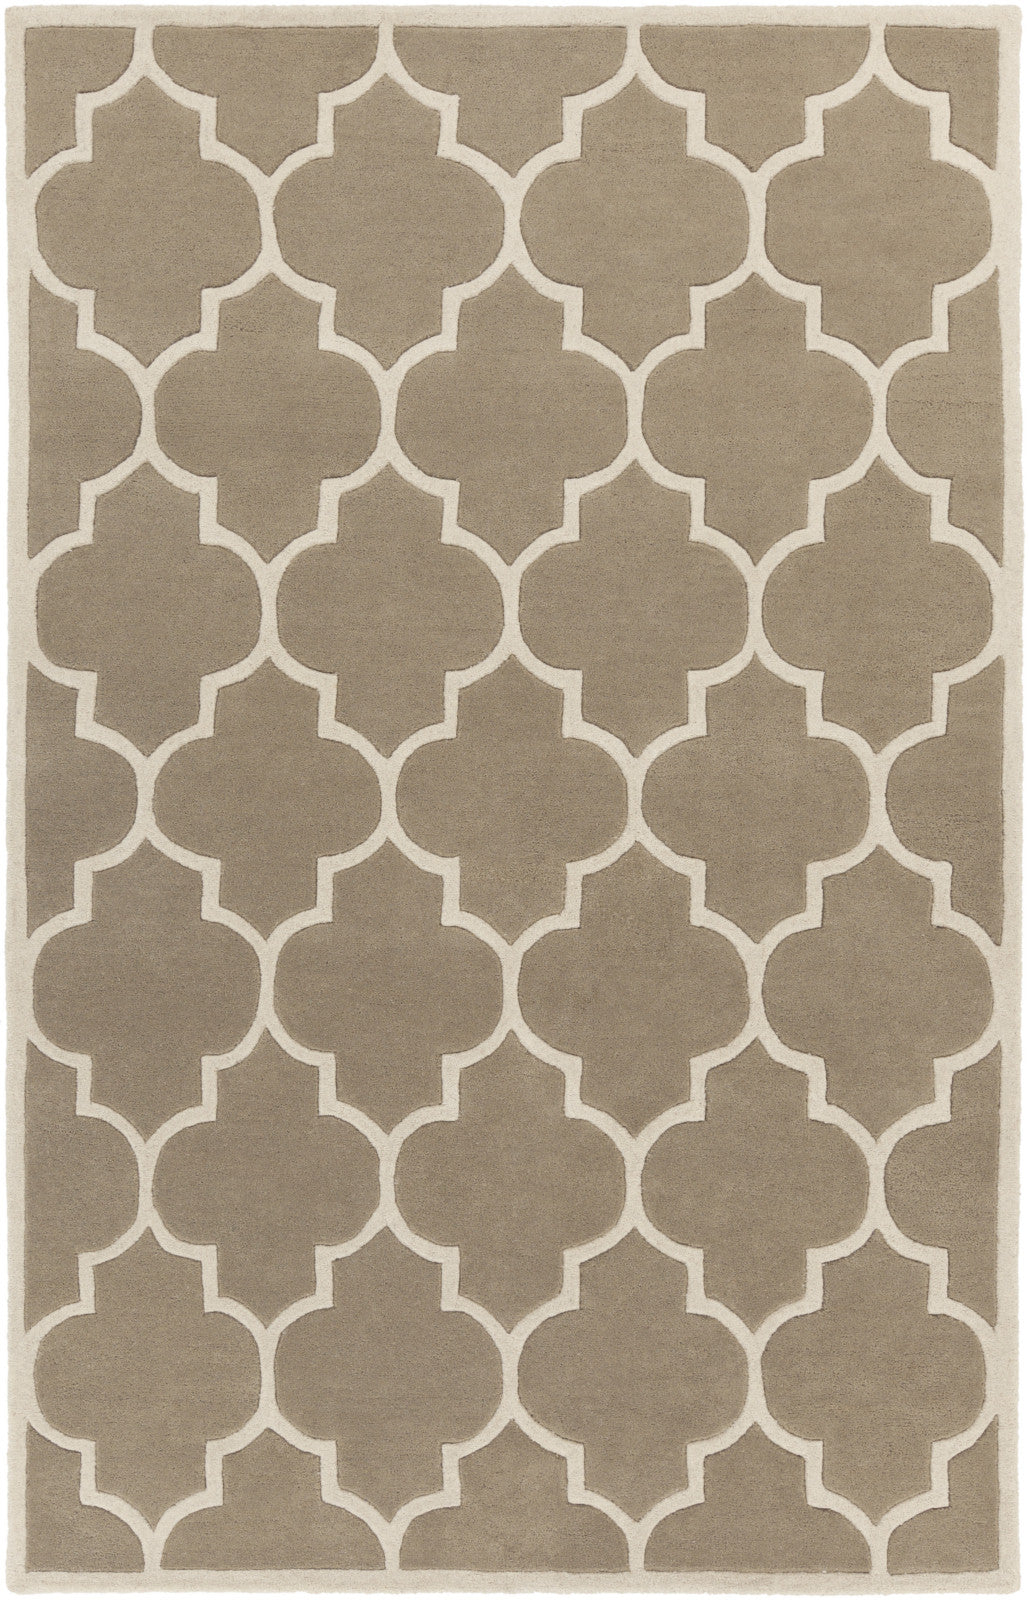 Artistic Weavers Transit Piper Taupe/Ivory Area Rug main image